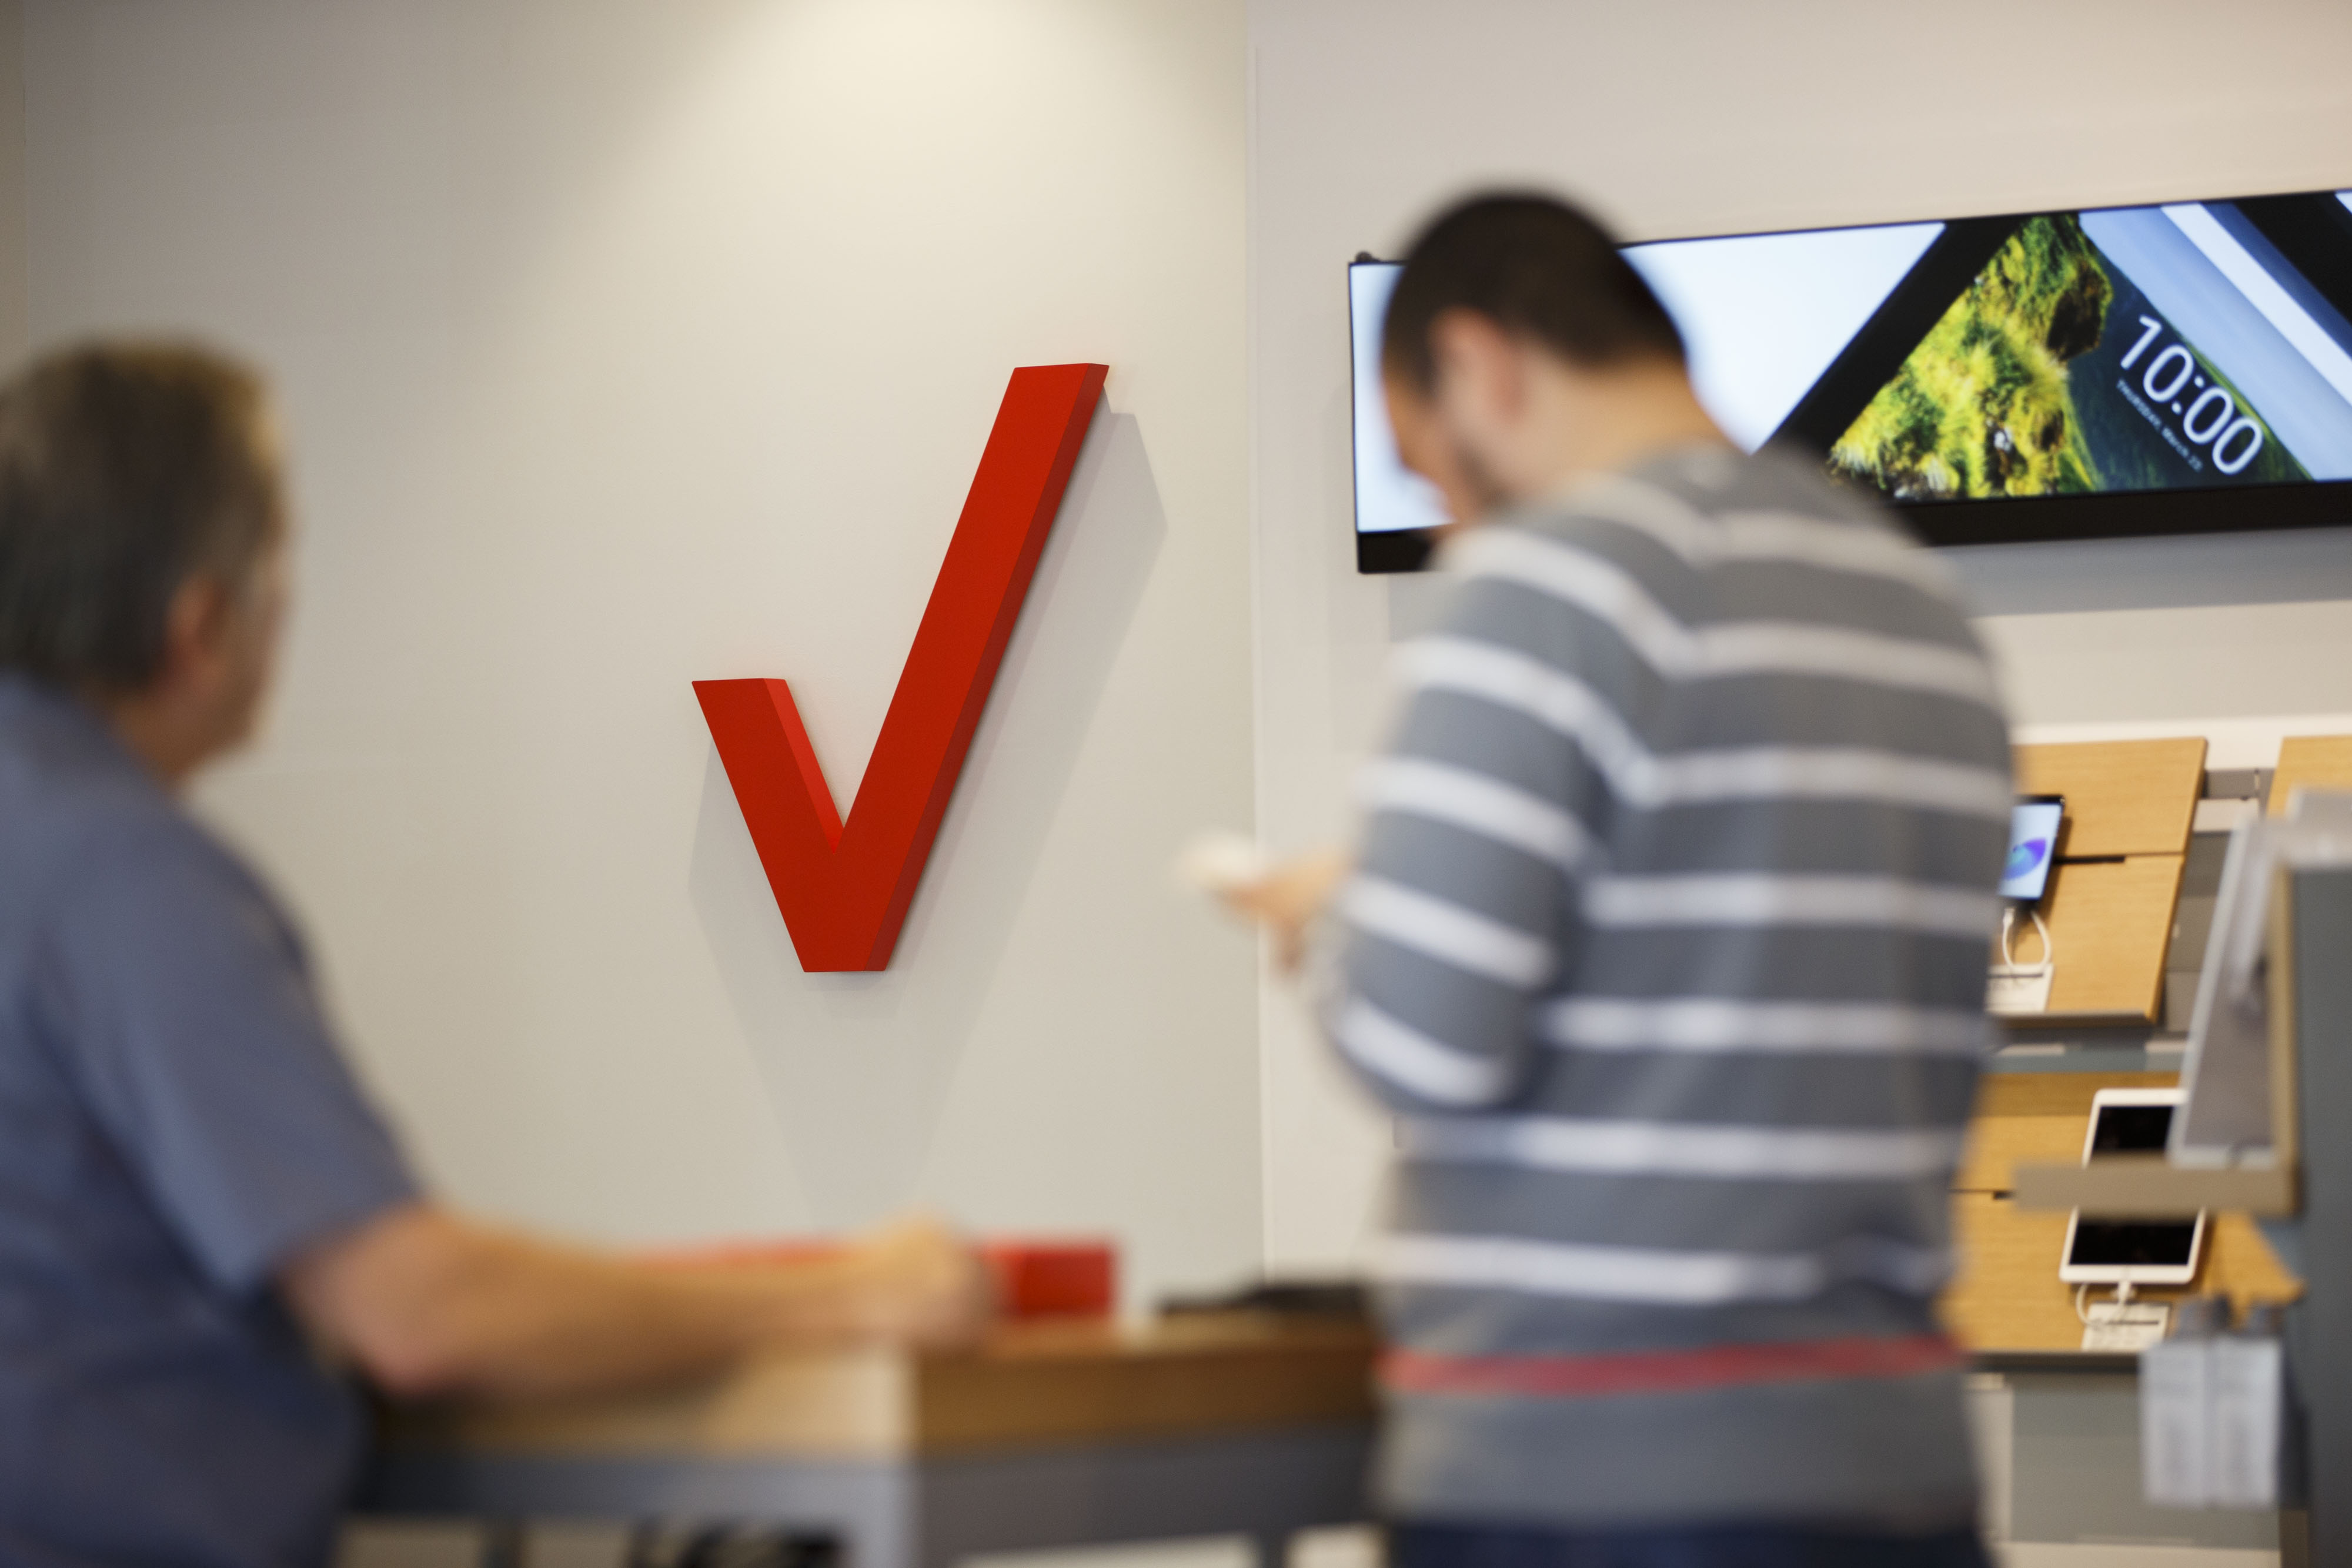 An employee assists a customer in front of a Verizon Communications Inc. logo at a store in Brea, California.